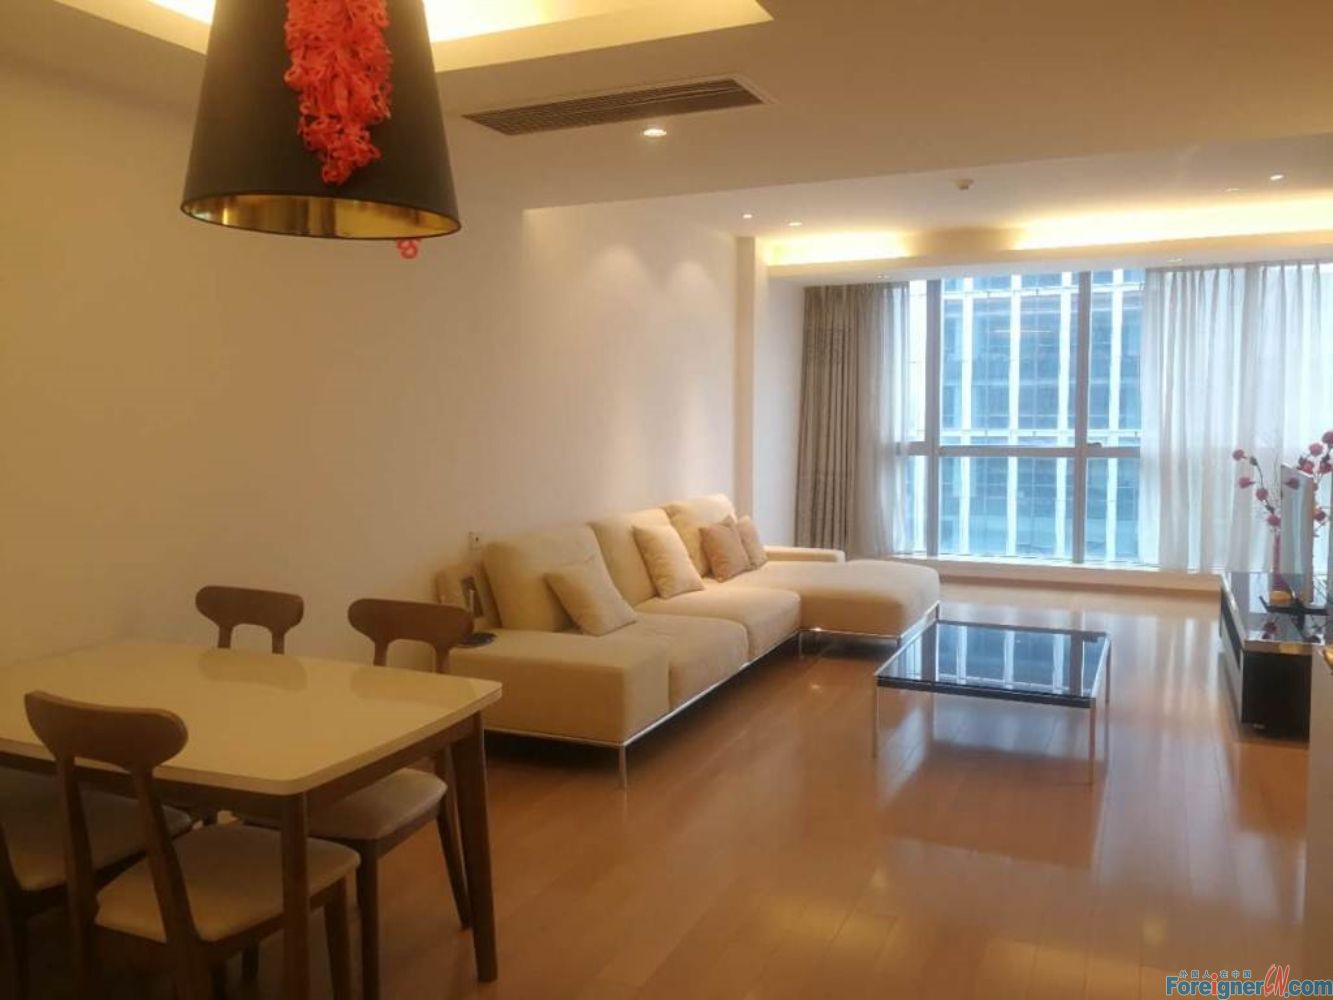 Excellent！！Global 188 apartment to rent/3 bedrooms and 2 bathrooms/cozy rooms， built-in oven/open kitchen /central AC, floor heating/Xinghai Square/Suzhou Center shopping mall